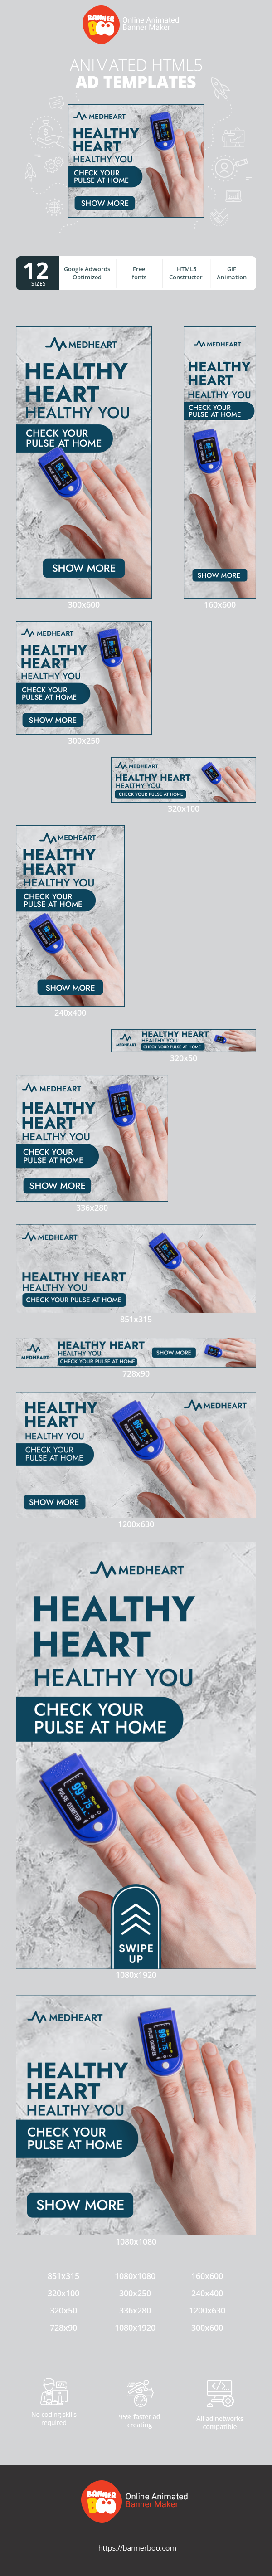 Banner ad template — Healthy Heart Healthy You — Check Your Pulse At Home